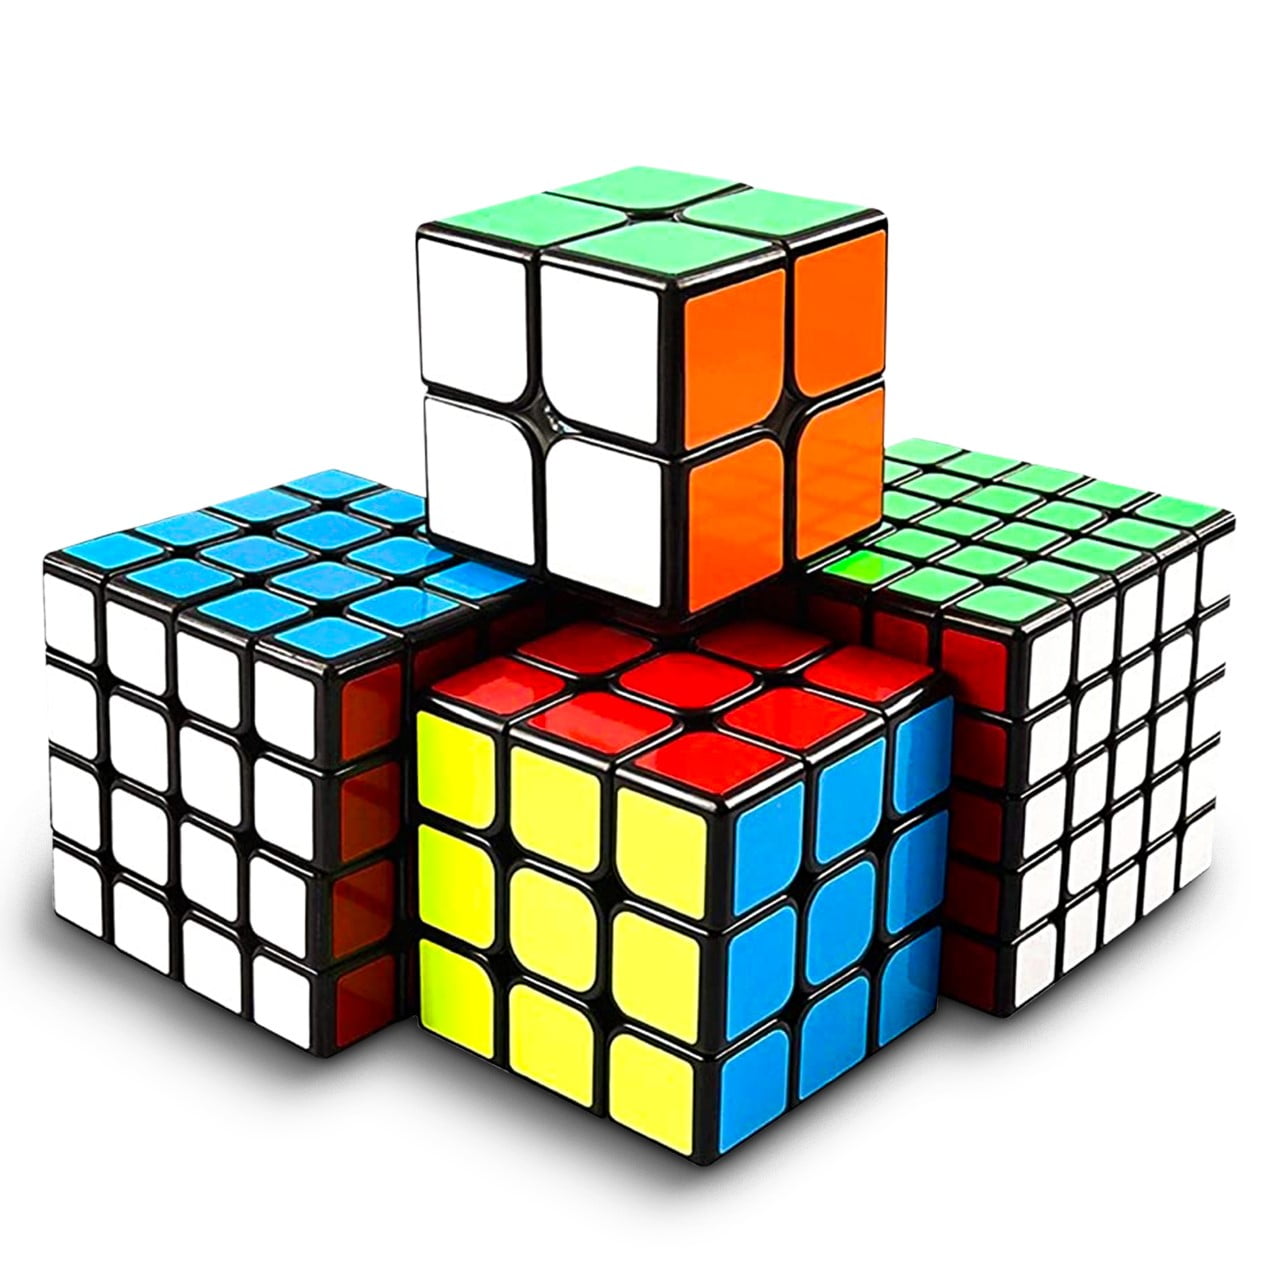 PREMIUM Professional 3x3x3 4-Color Magic Cube Game Puzzle Toy For Adult And Kid 